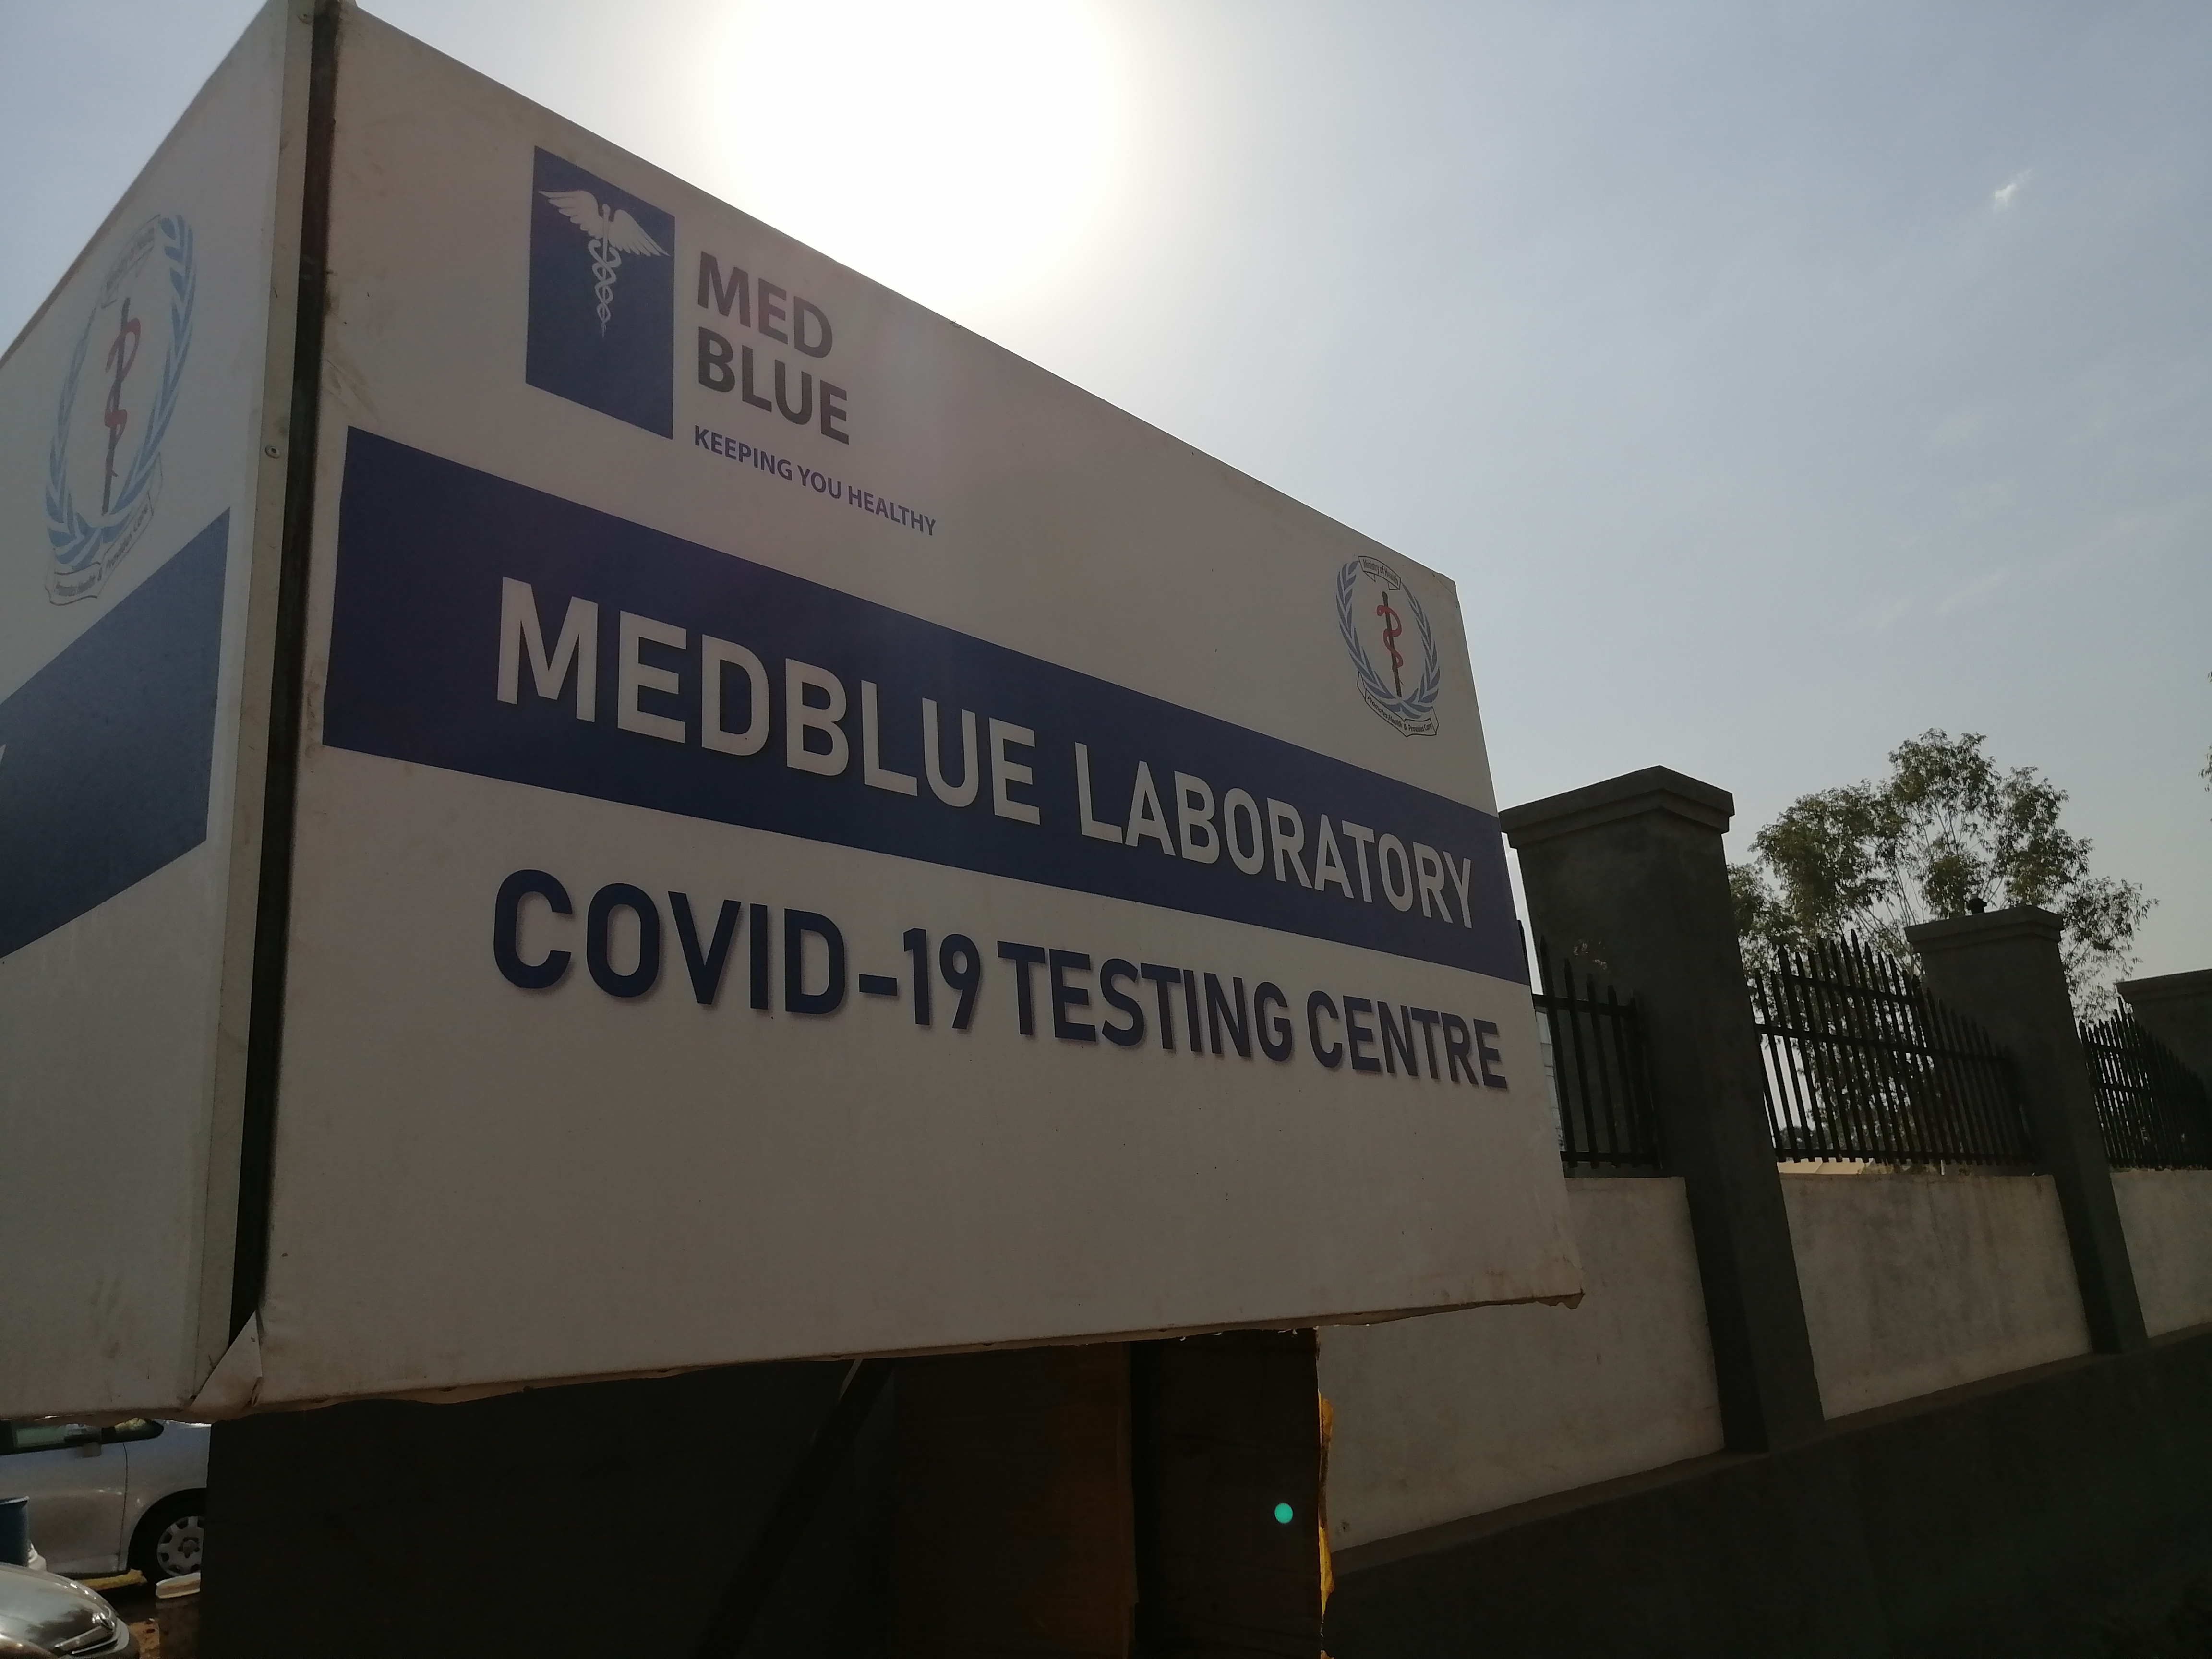 Editor’s Note: Apology to Medblue Laboratories